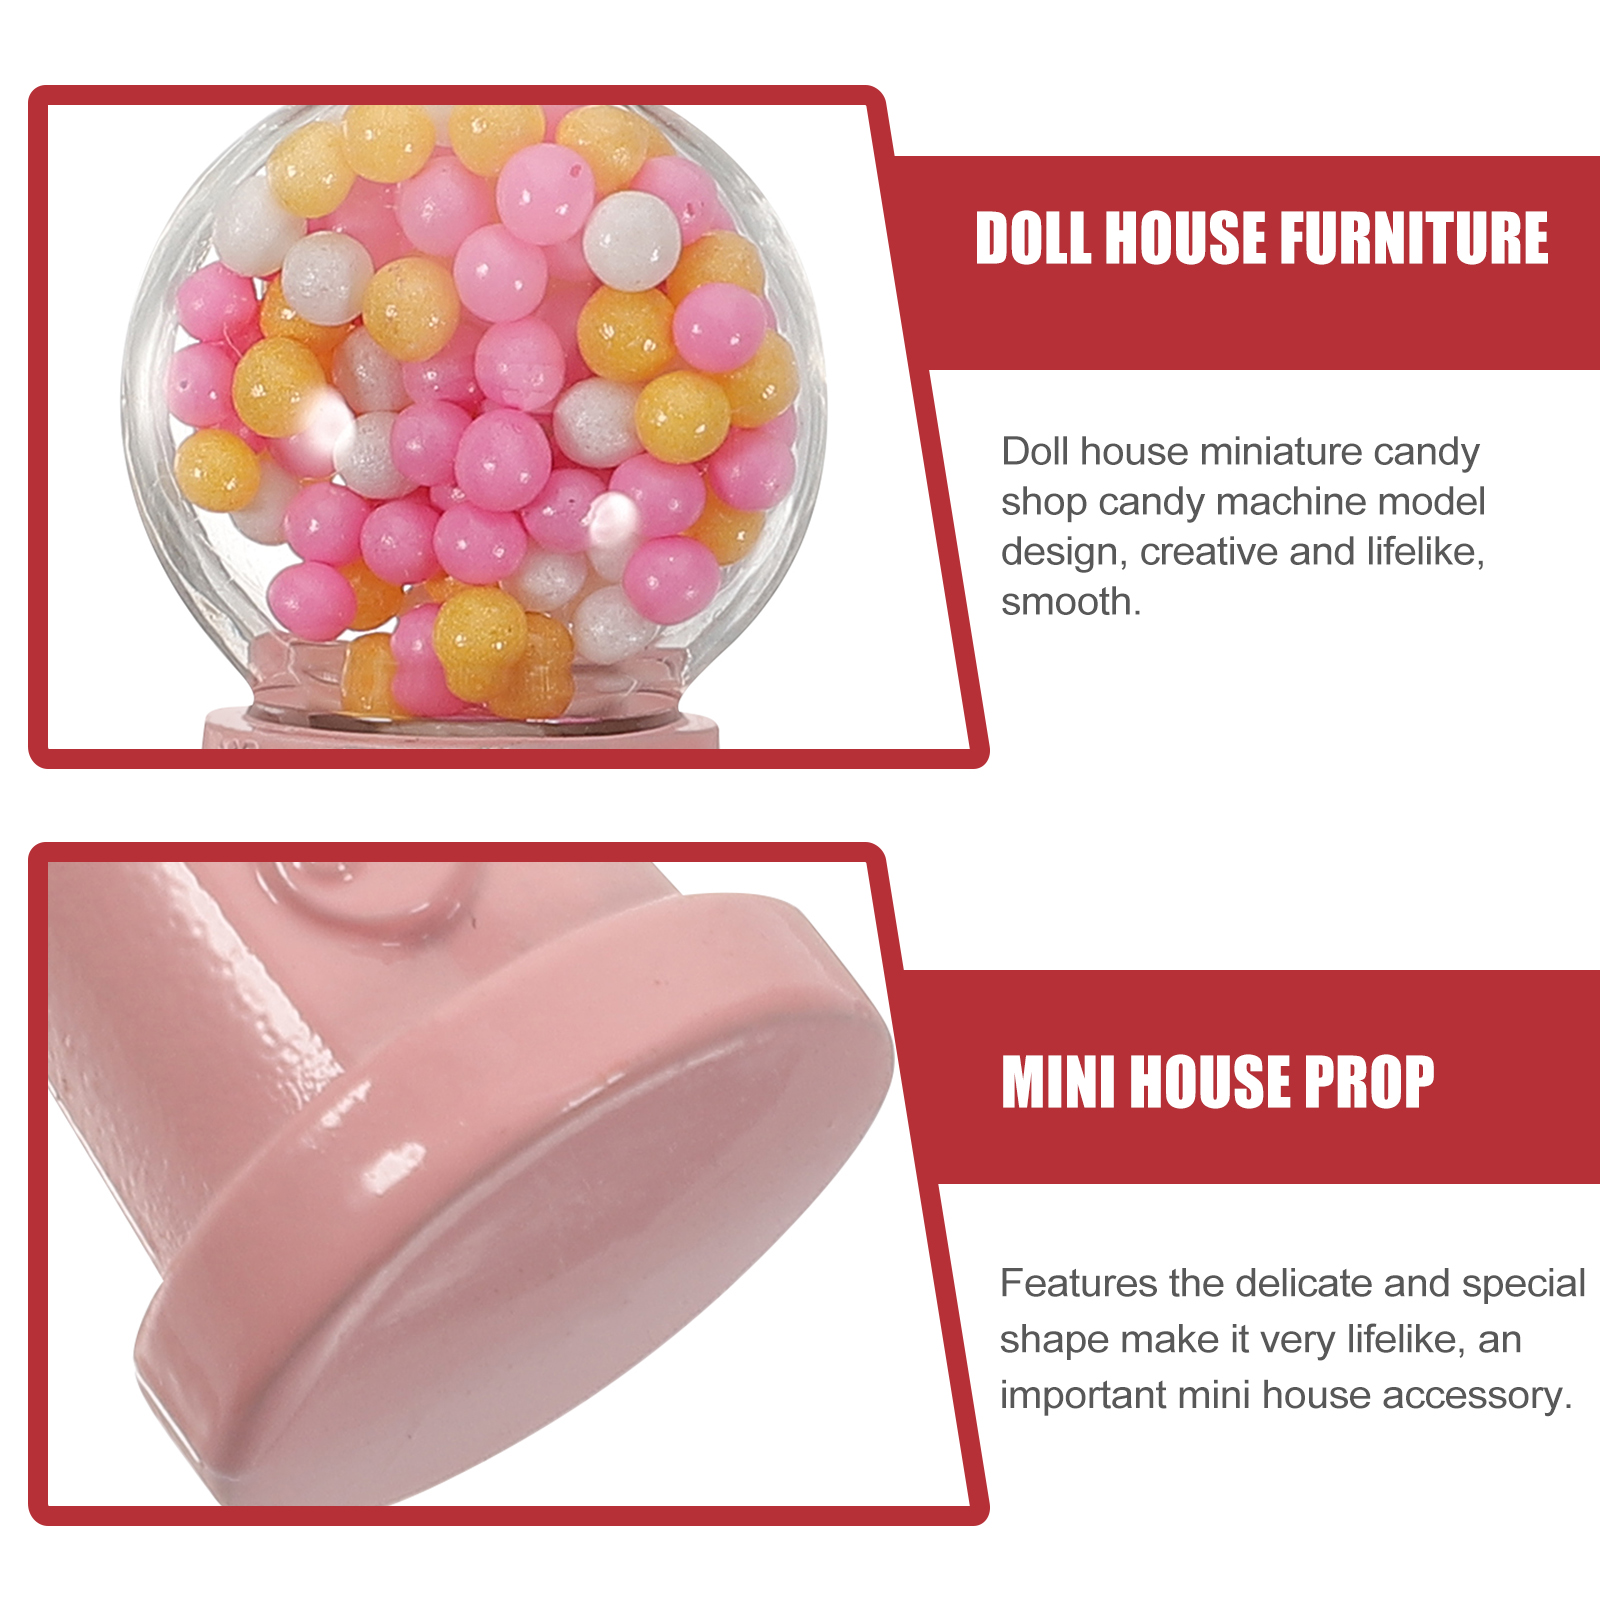 Set of 2 Mini Candy Machine Miniature Toys Accessories Doll House Furniture Gumball Twisters Dispenser Child - image 5 of 6